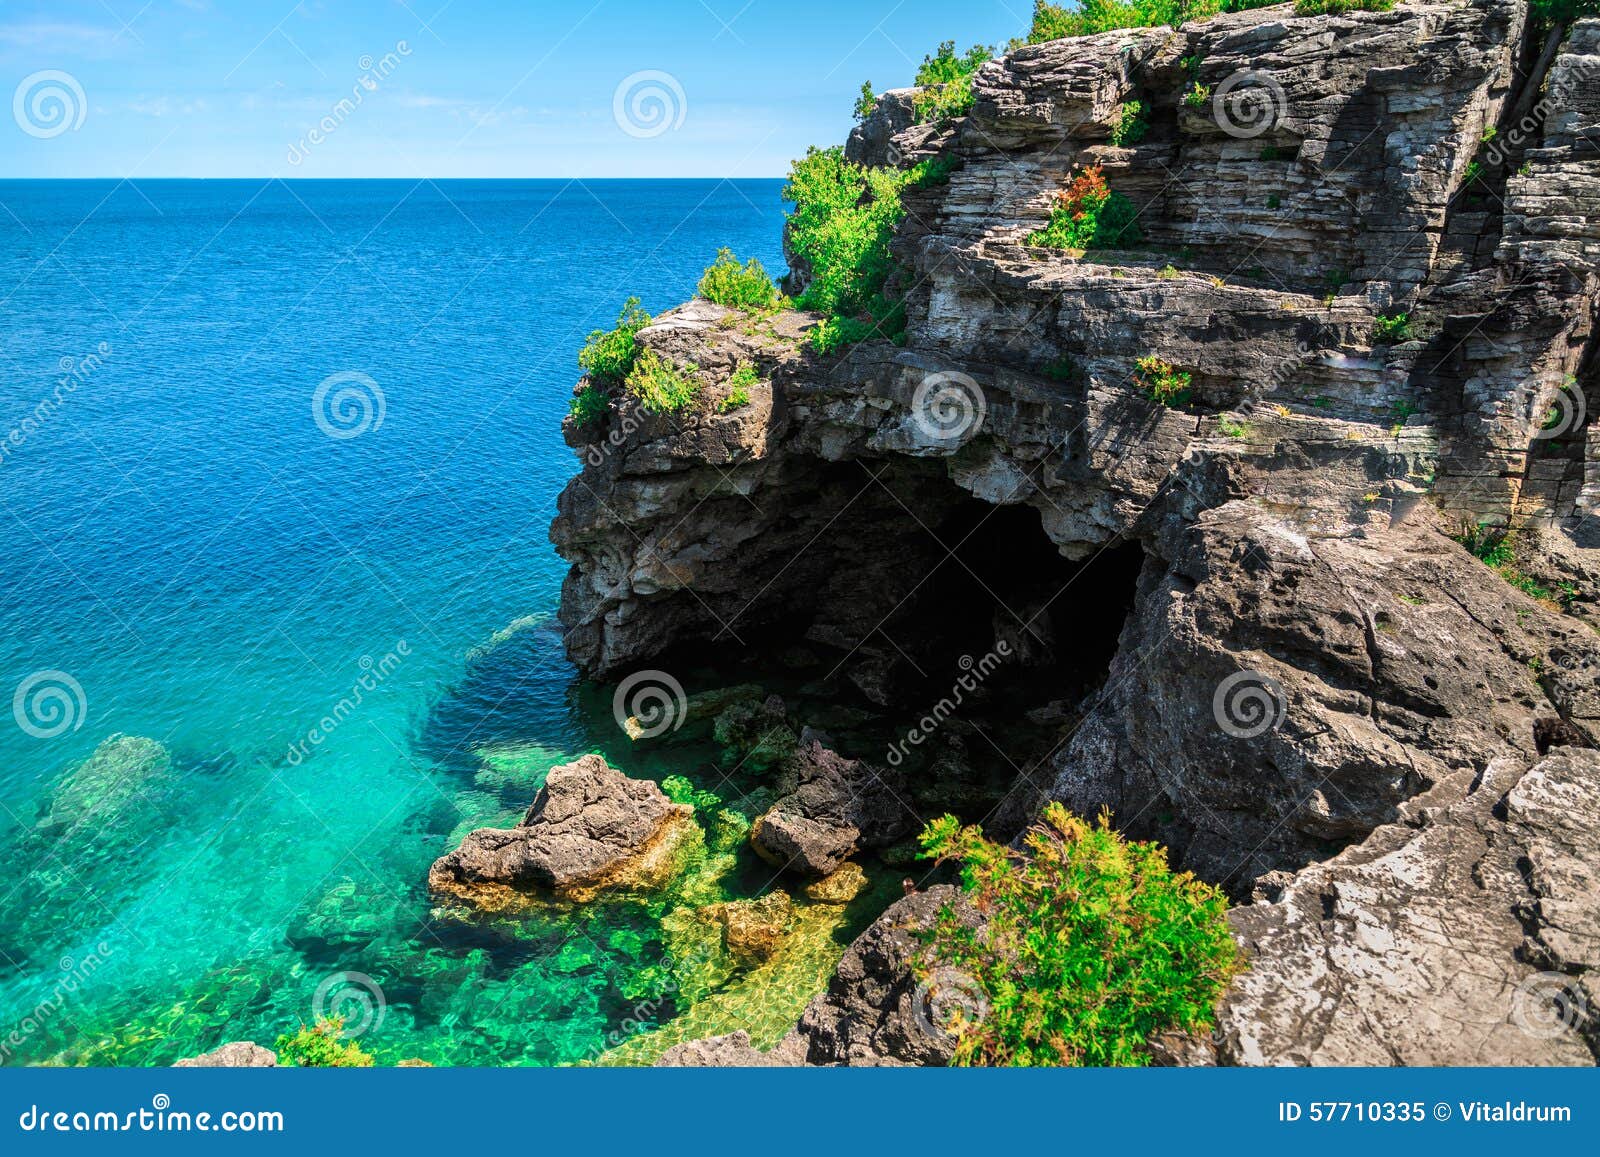 amazing inviting view of entrance to grotto from the lake side at bruce peninsula cyprus lake, ontario